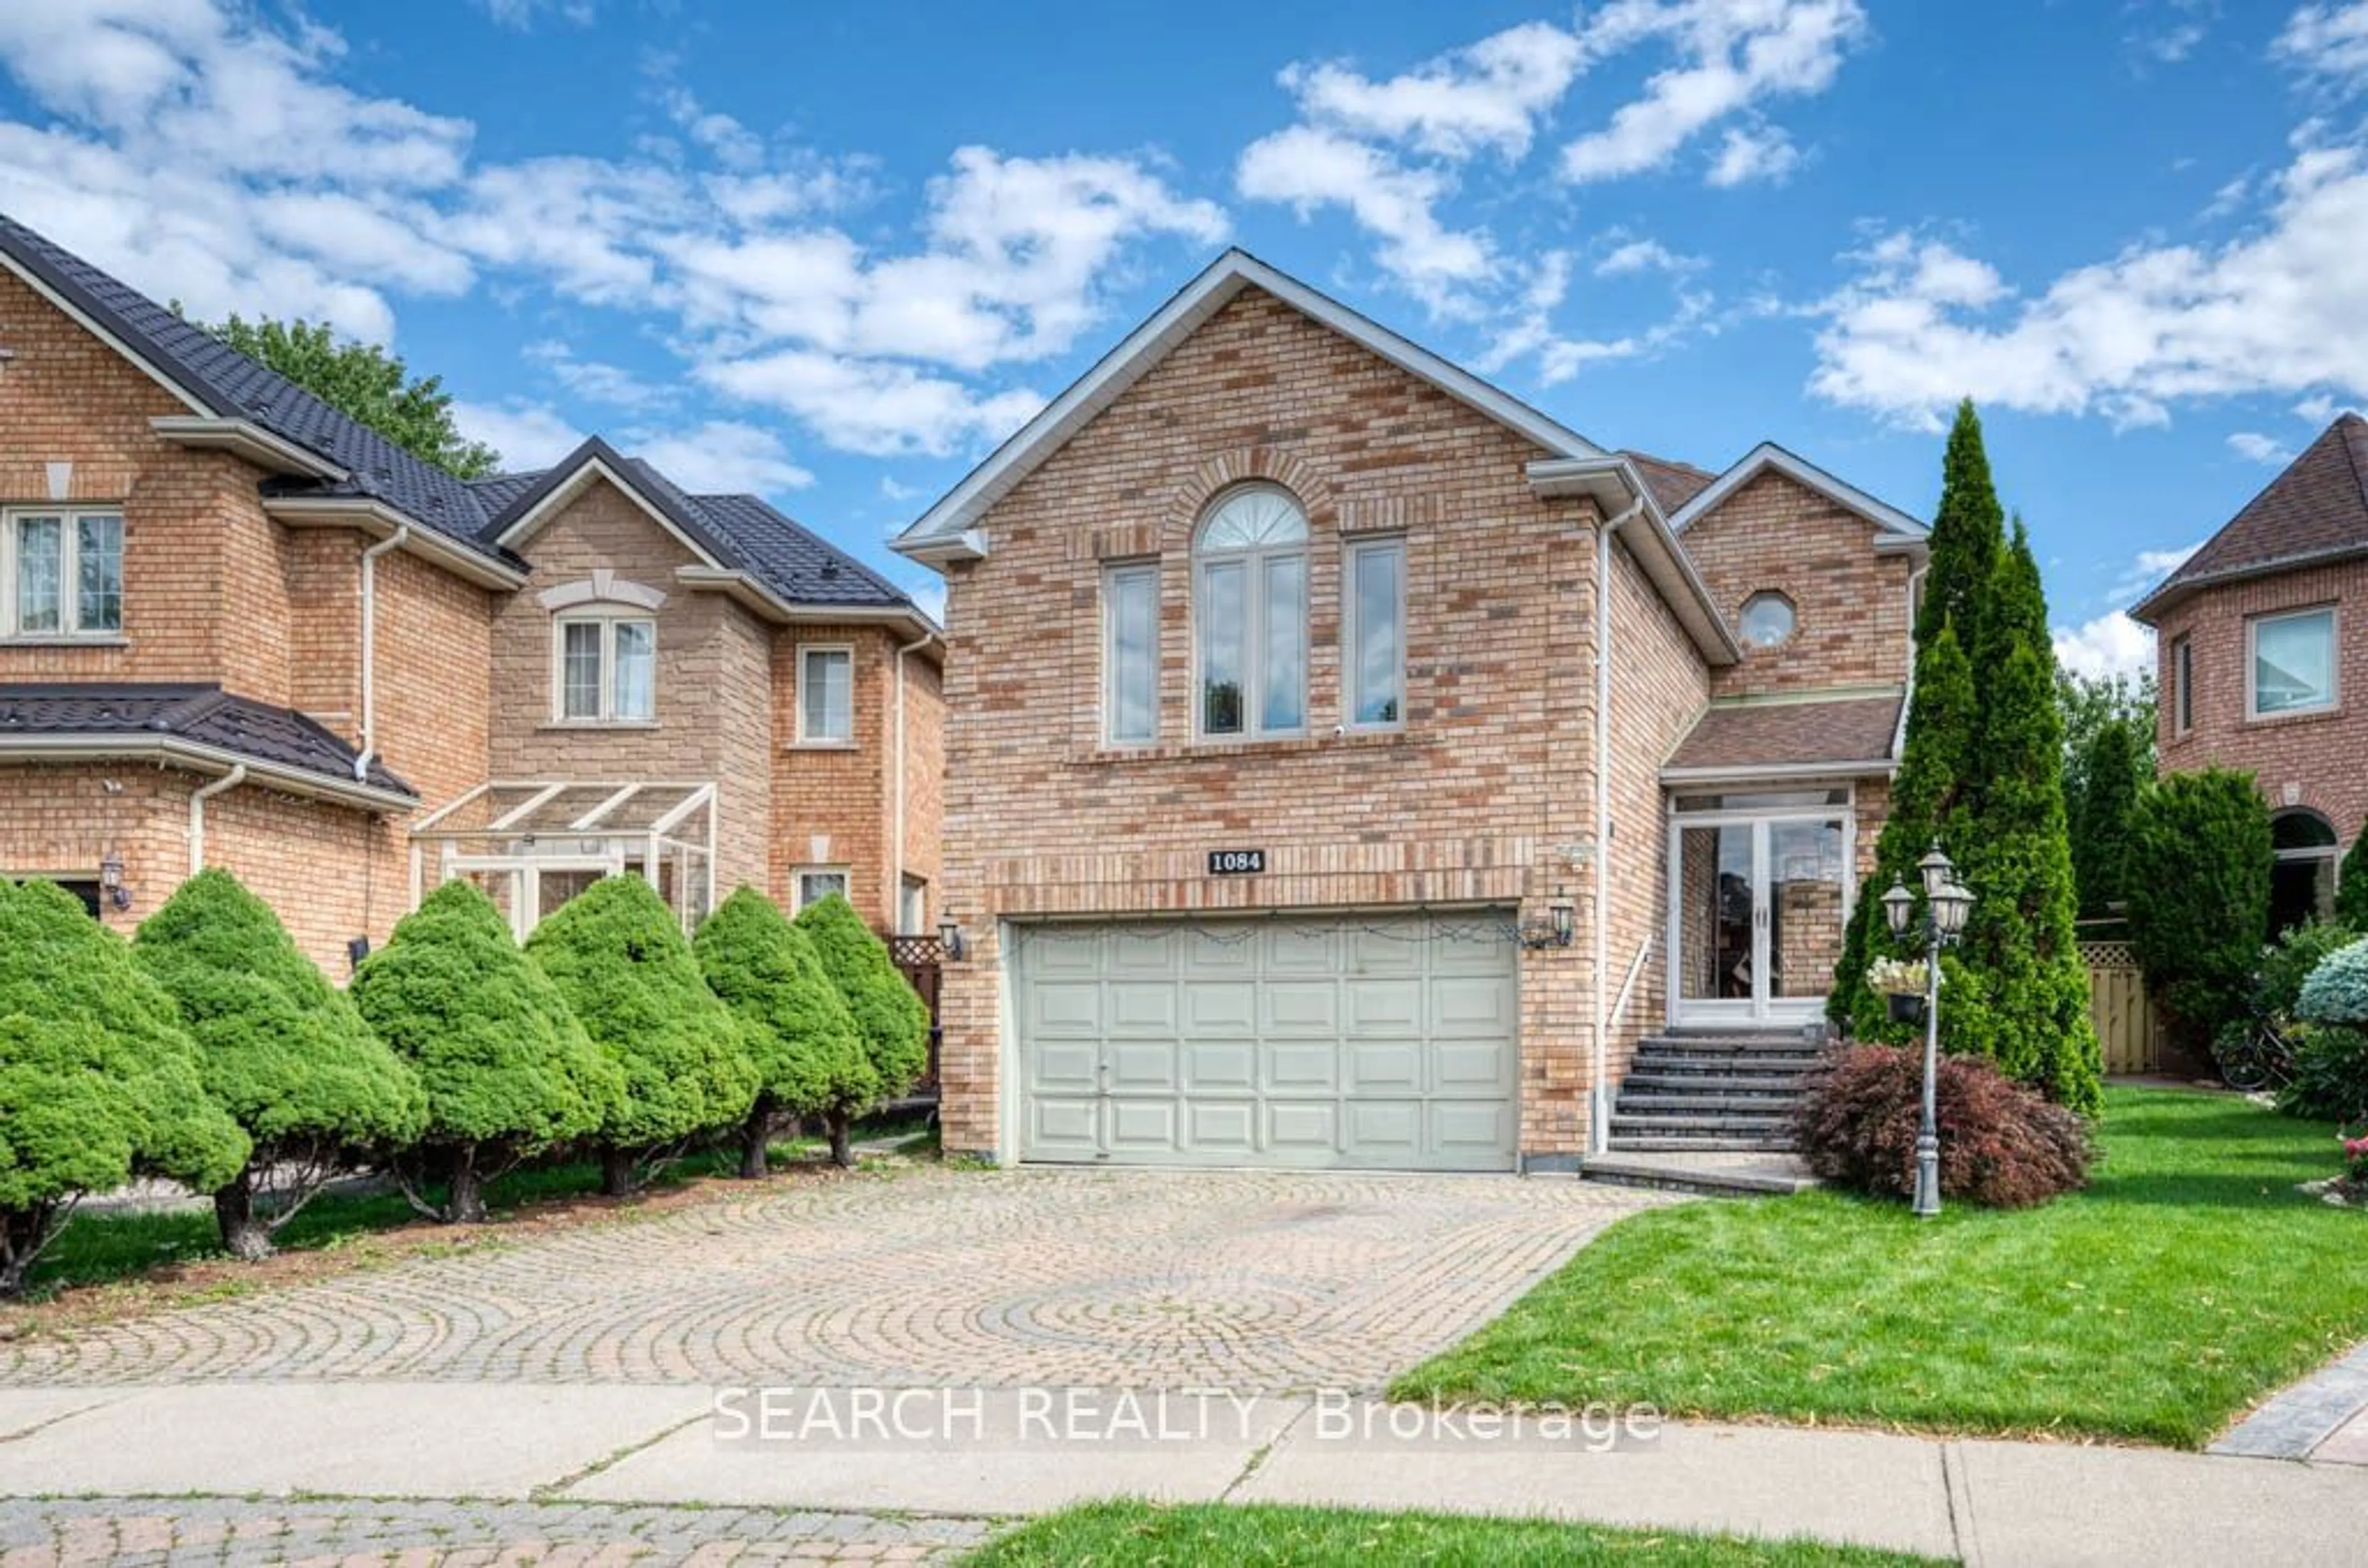 Home with brick exterior material for 1084 Charminster Cres, Mississauga Ontario L5V 1R1